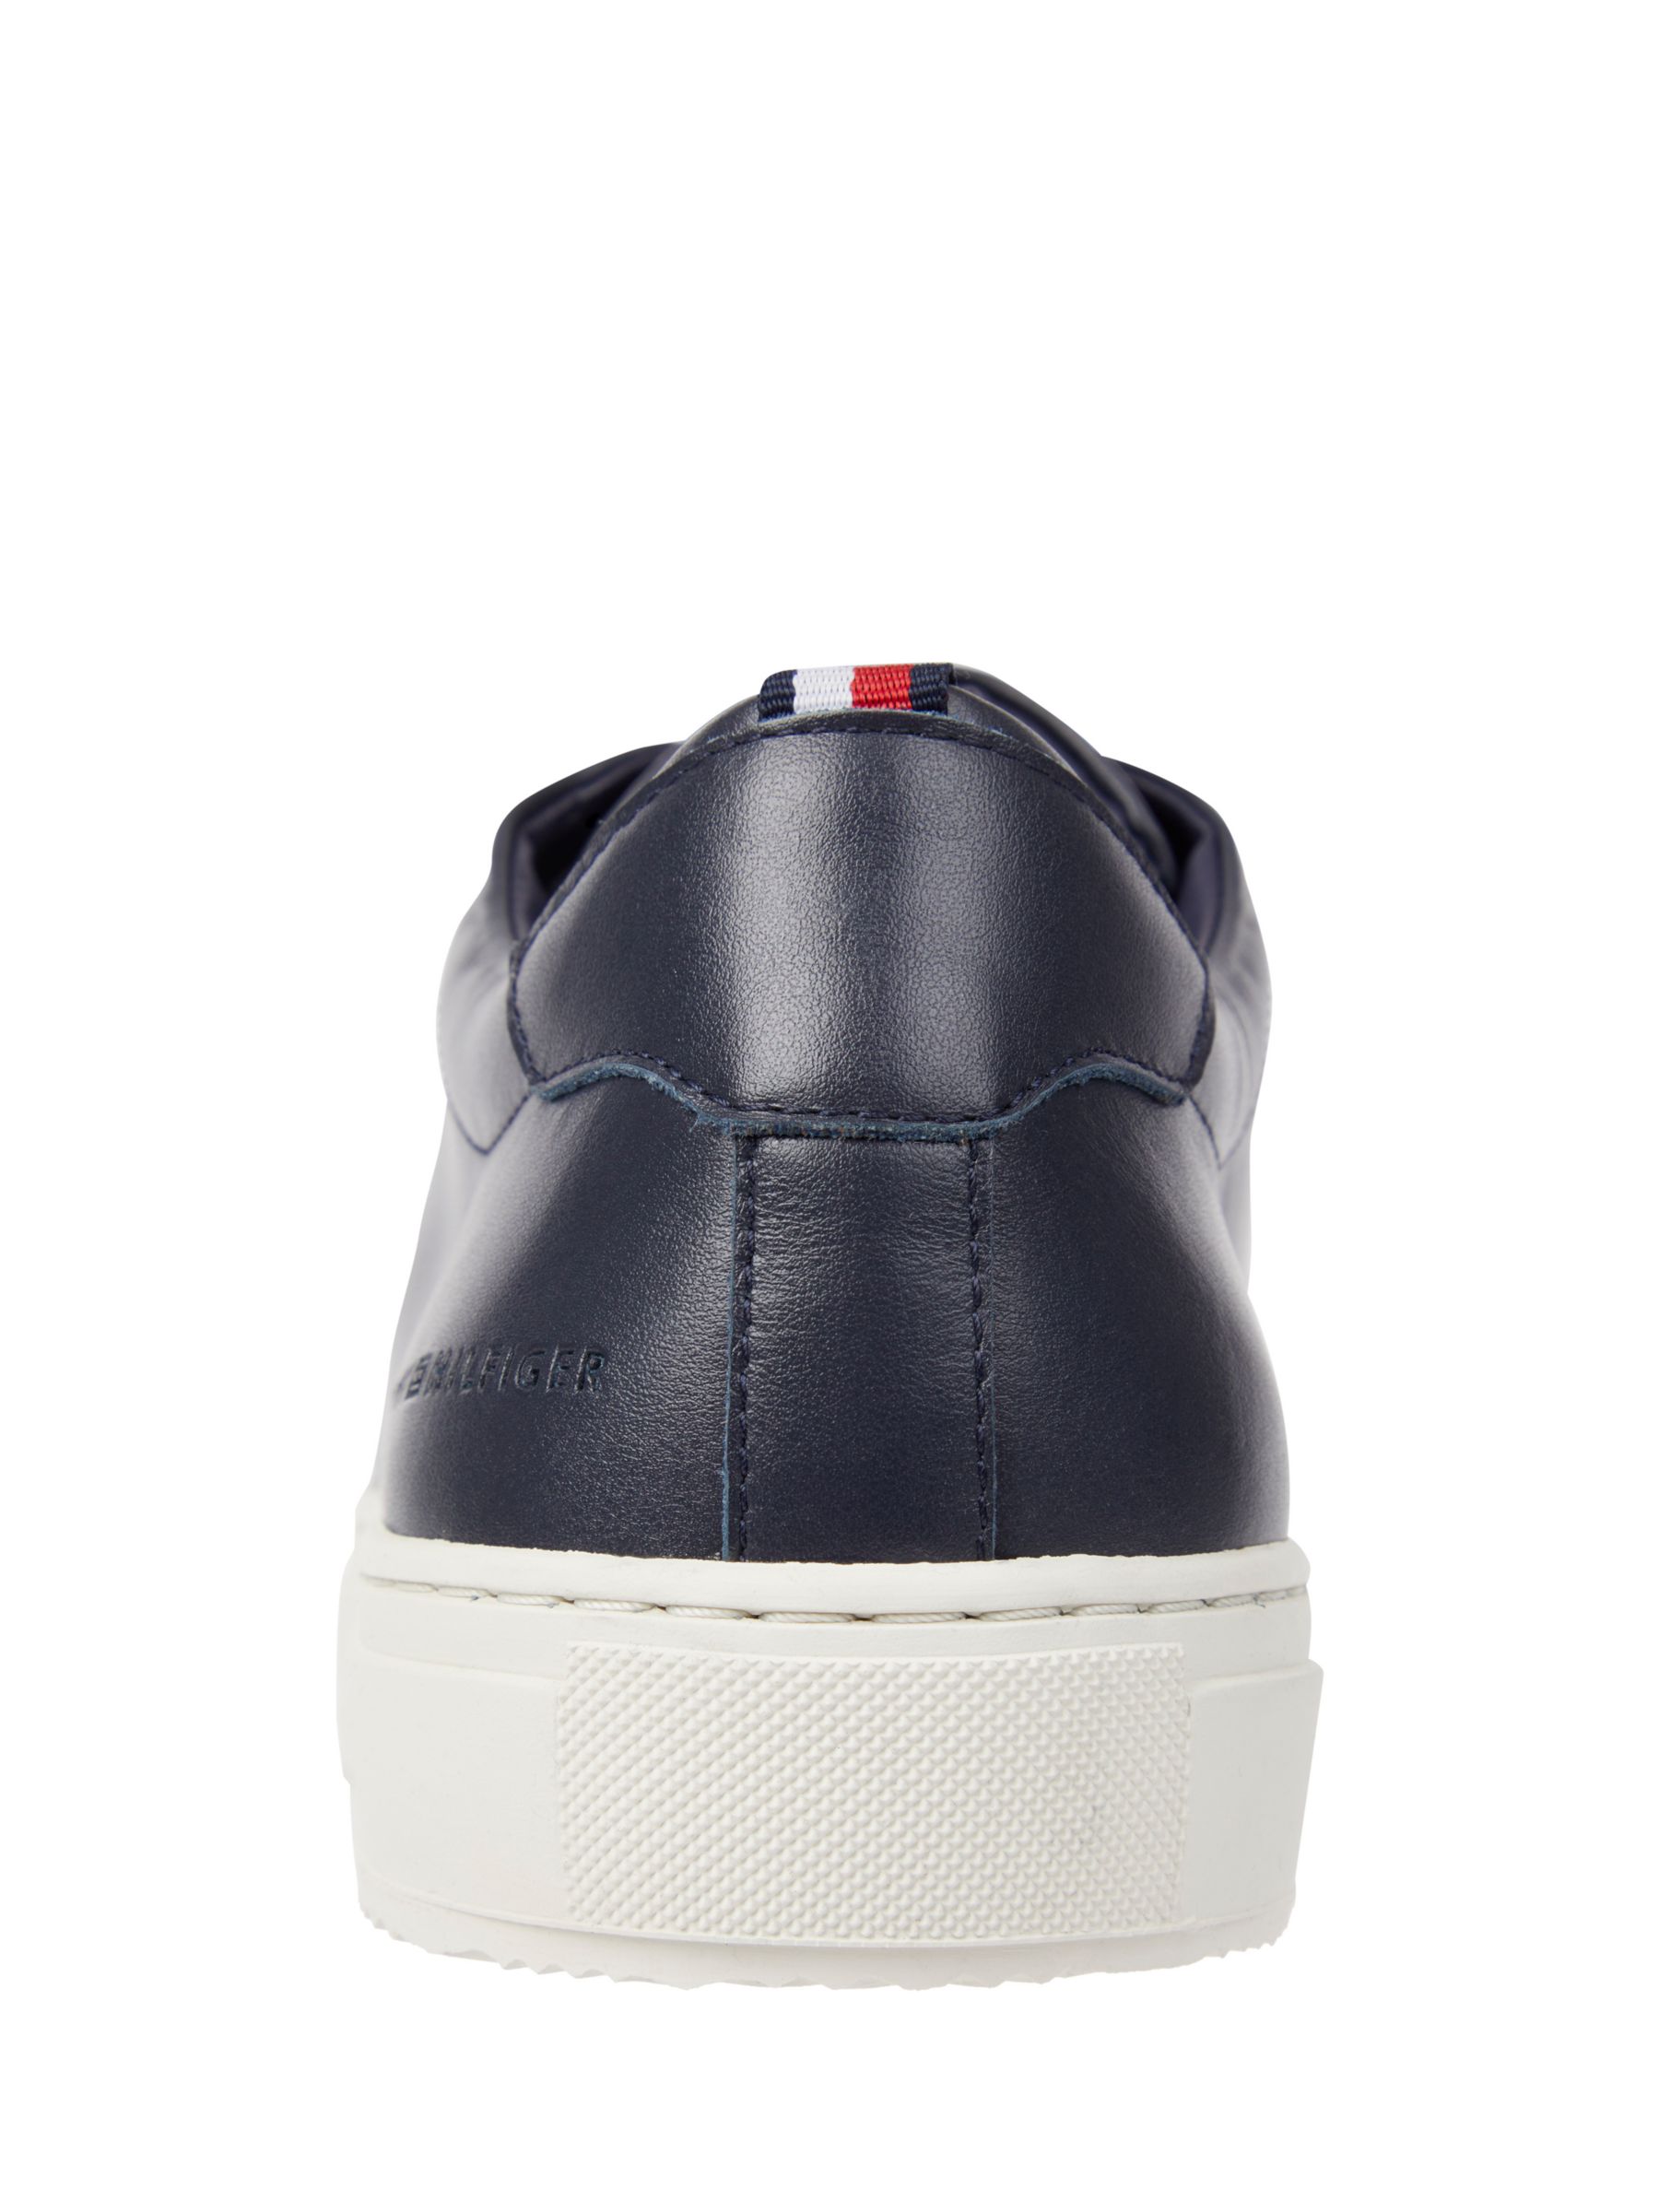 Buy Tommy Hilfiger Heritage Premium Leather Trainers, Navy Online at johnlewis.com